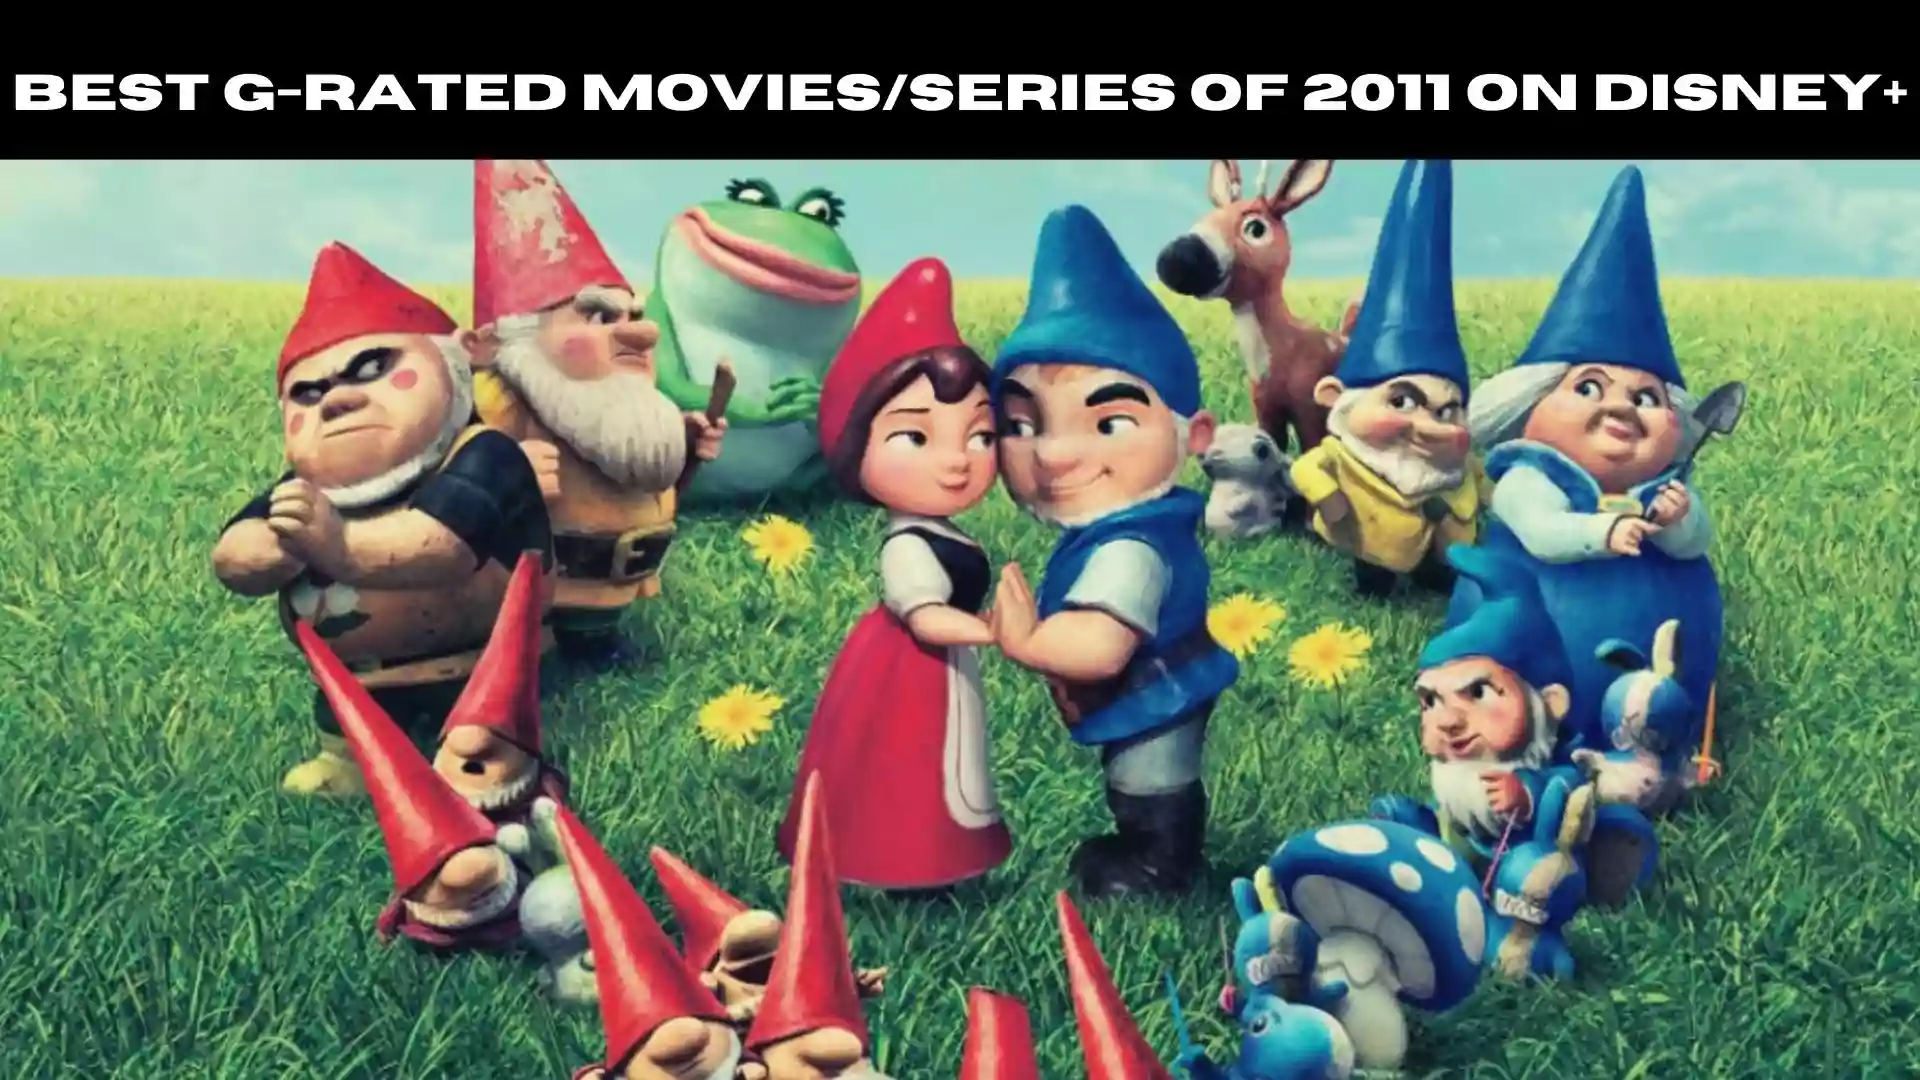 Best G-Rated Movies/series of 2011 on Disney+